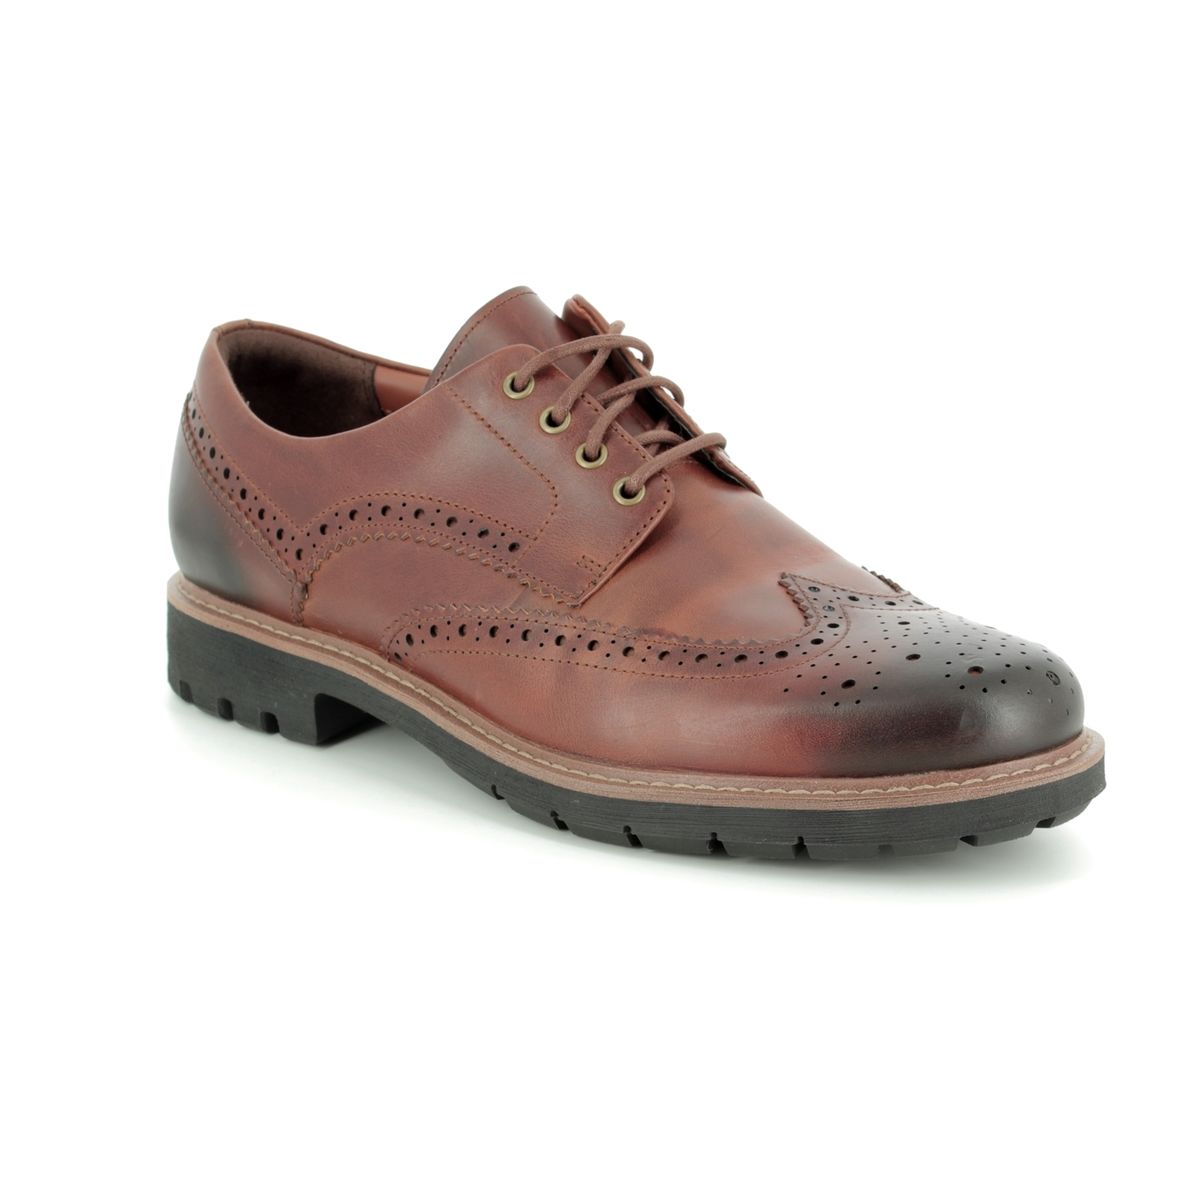 clarks brogues shoes